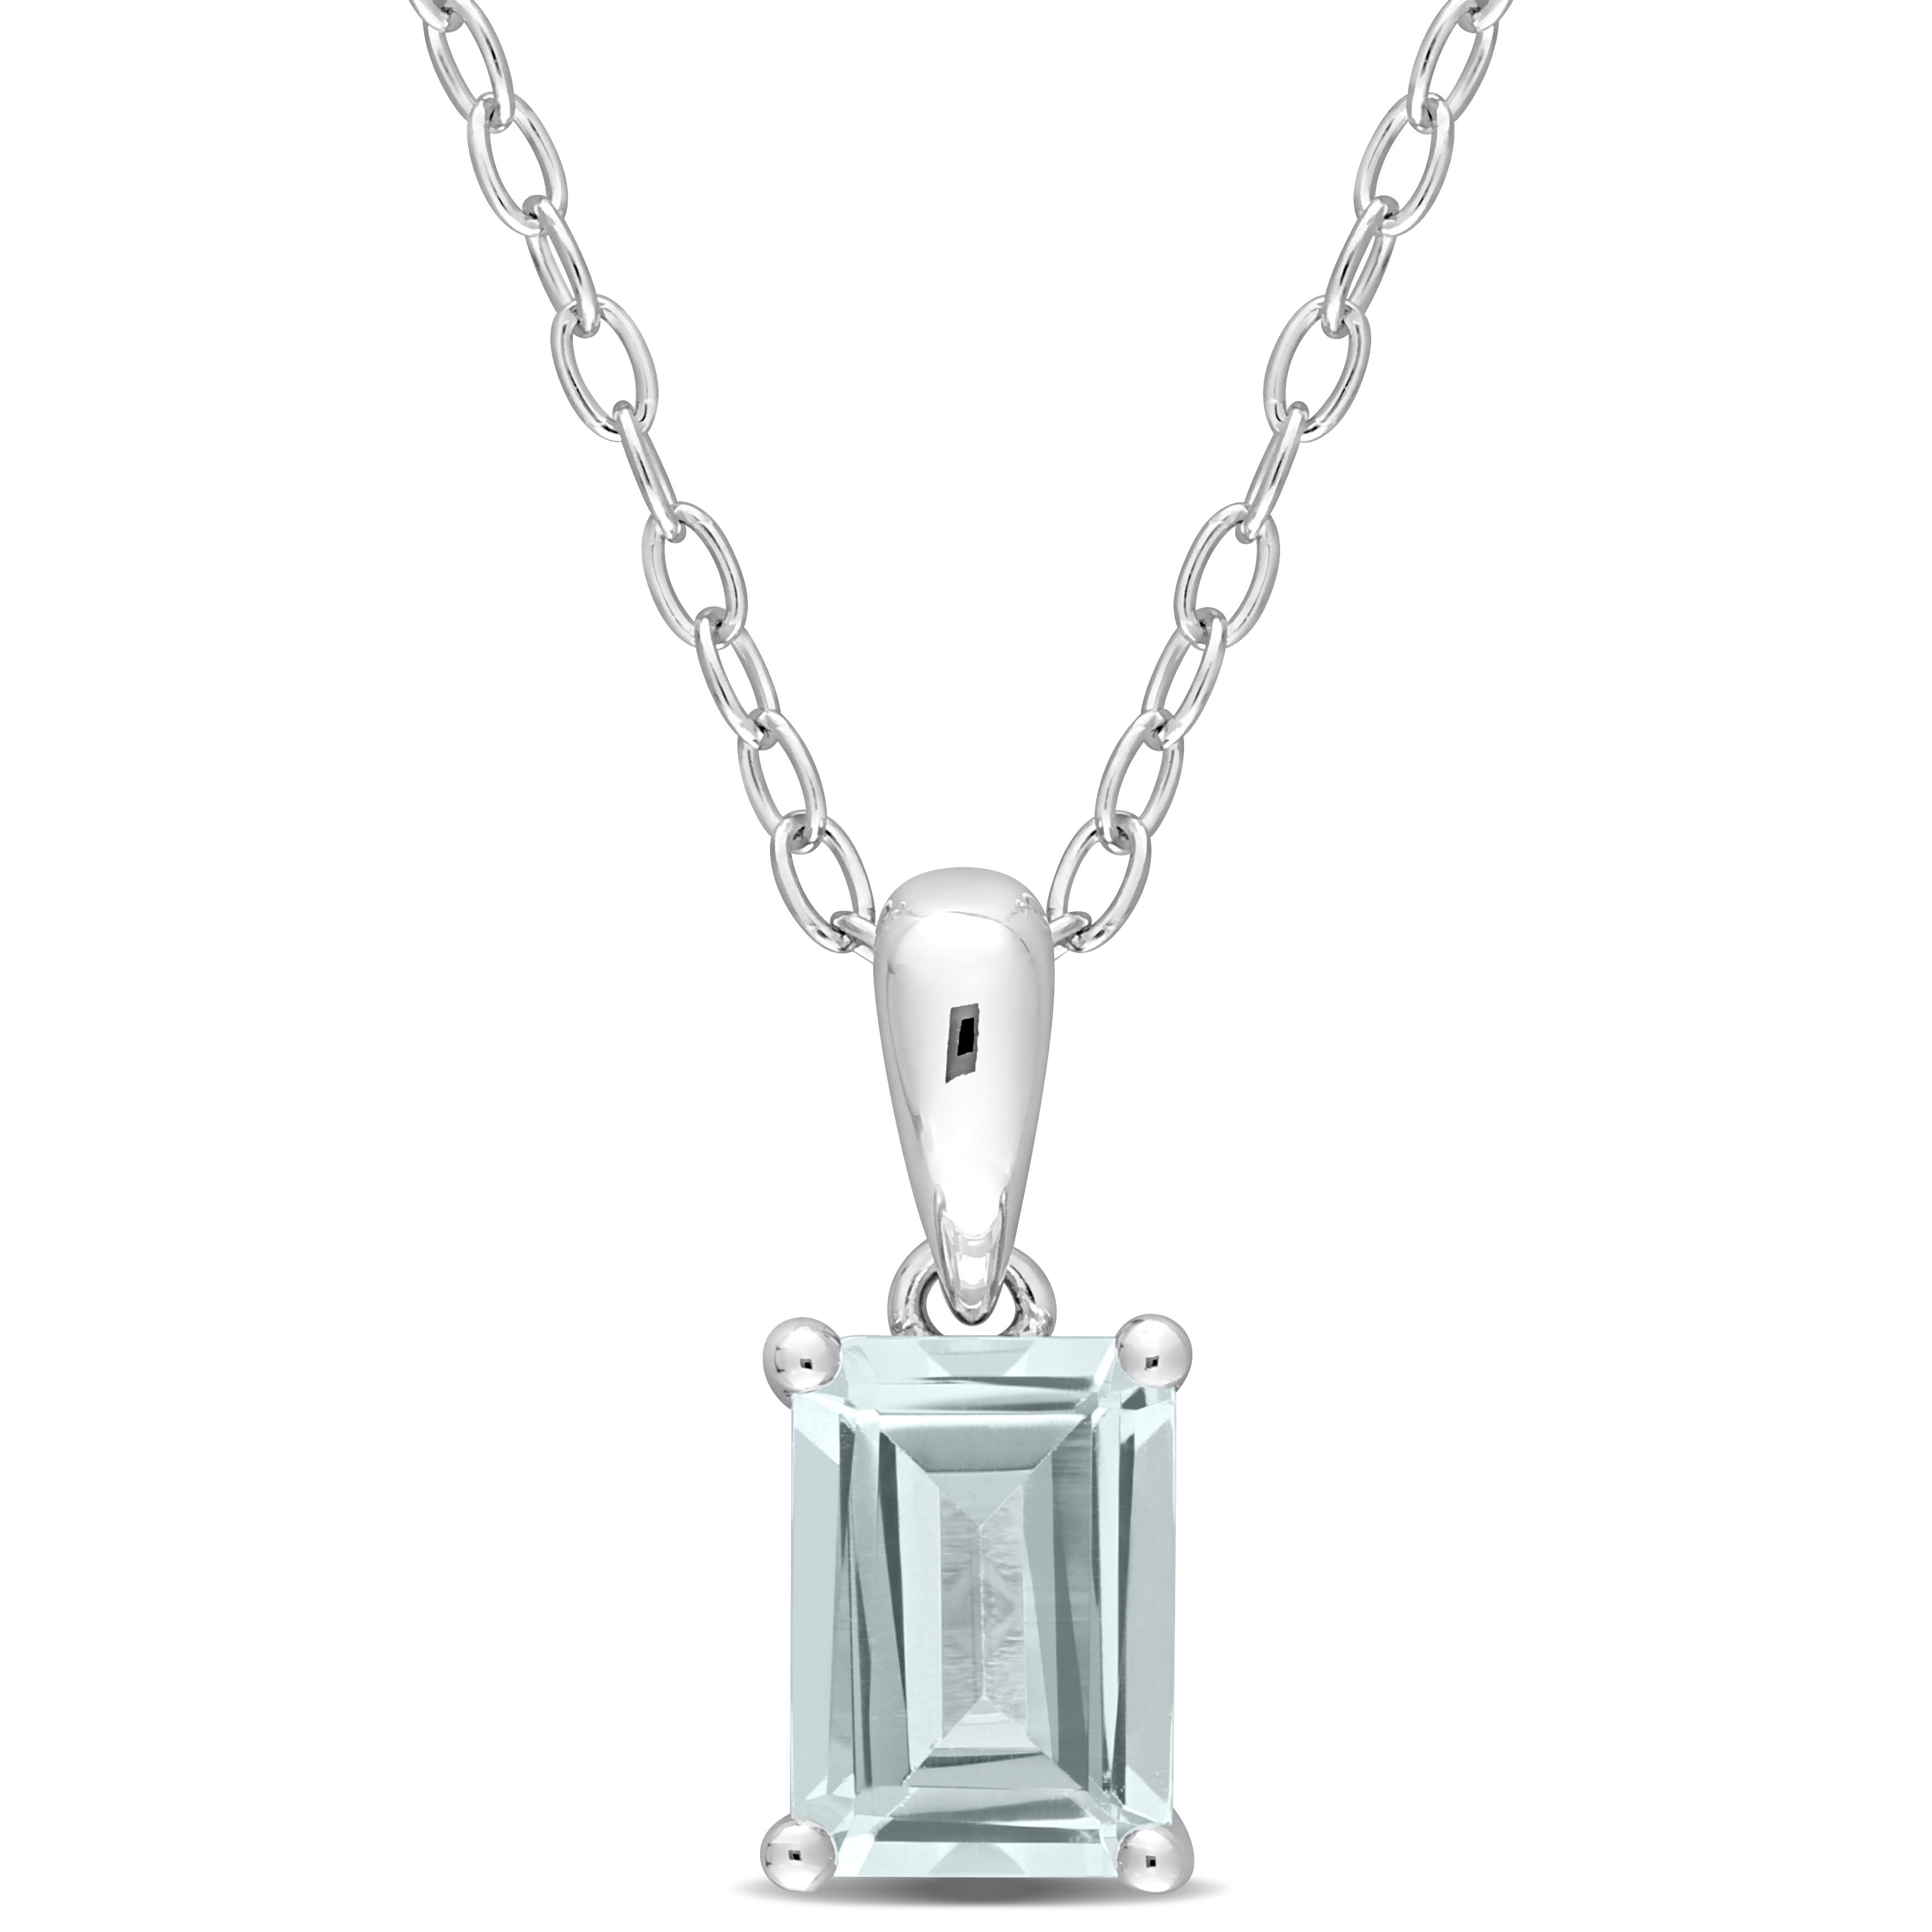 1 CT TGW Emerald Cut Aquamarine Solitaire Heart Design Pendant with Chain in Sterling Silver - 18 in.